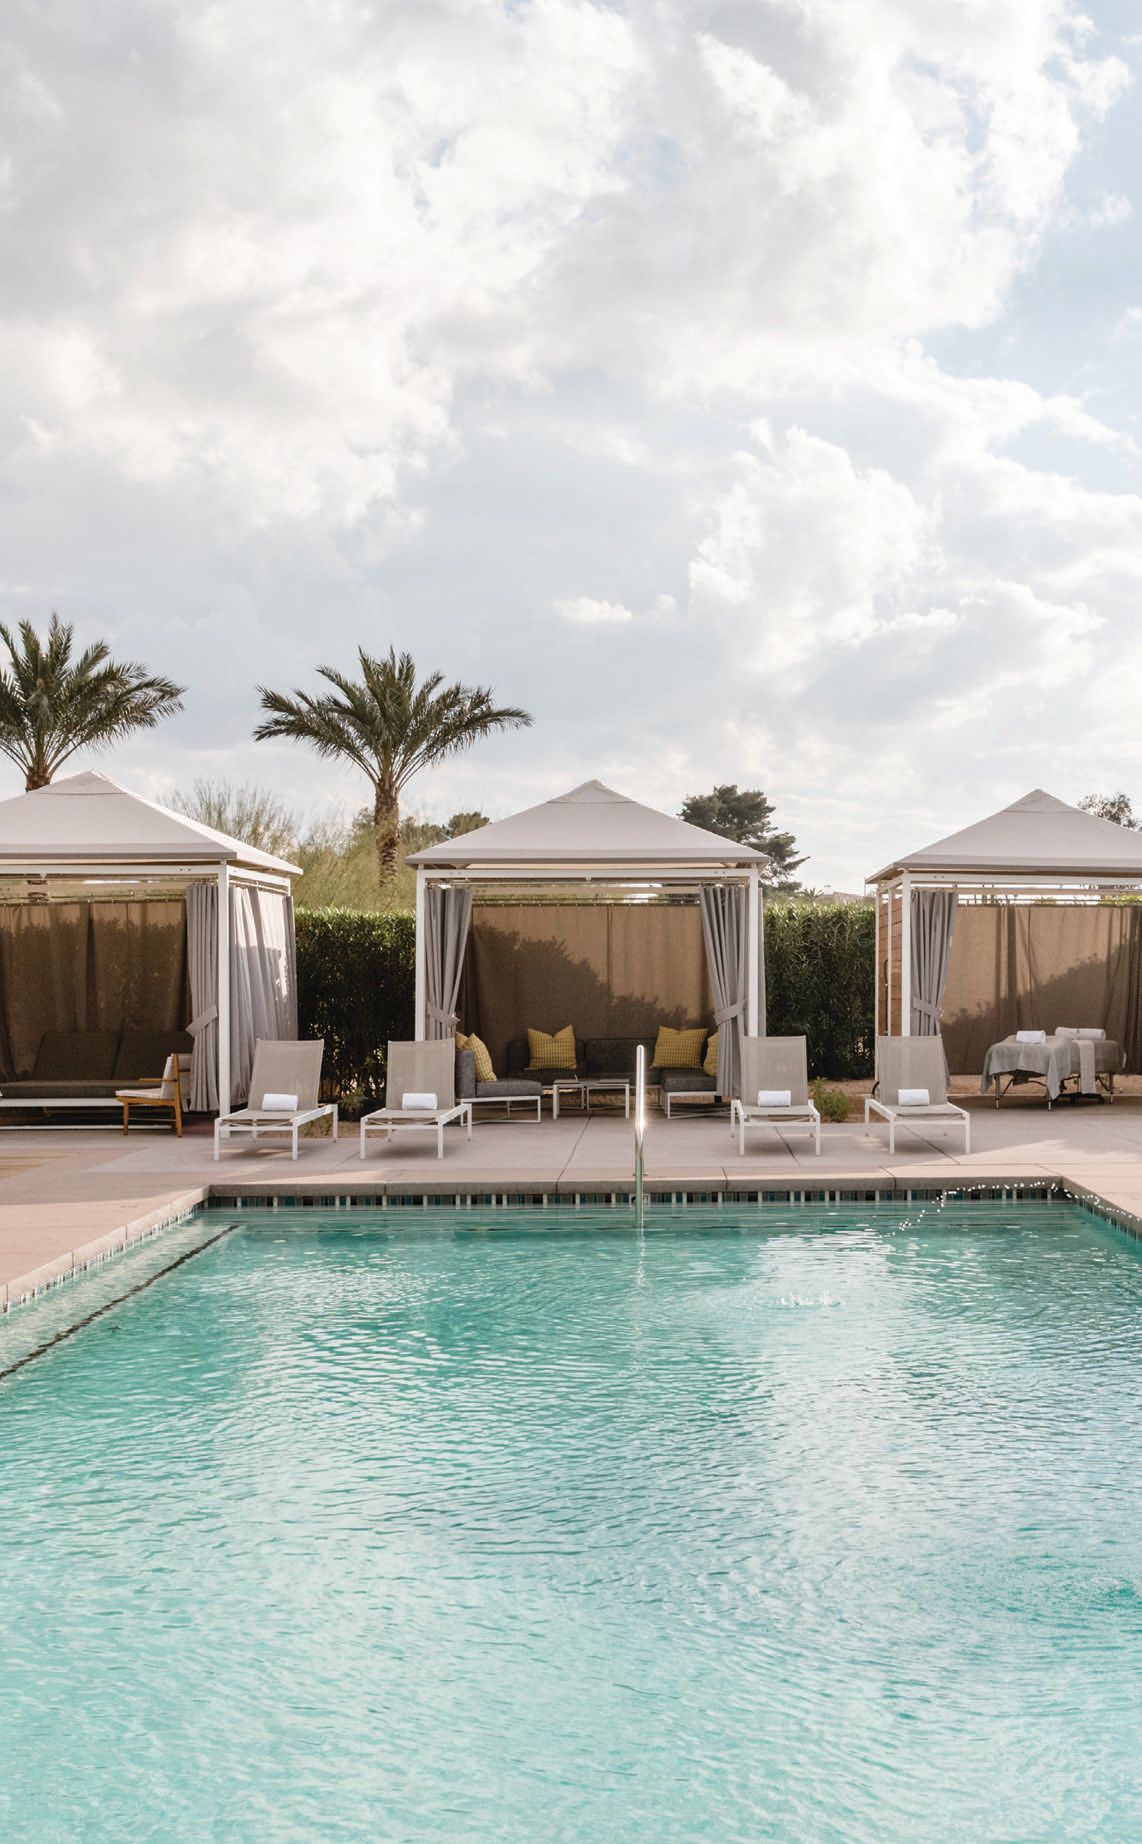 The Andaz Scottsdale Palo Verde Spa & Apothecary pool PHOTO BY STEPHANIE RUSSO